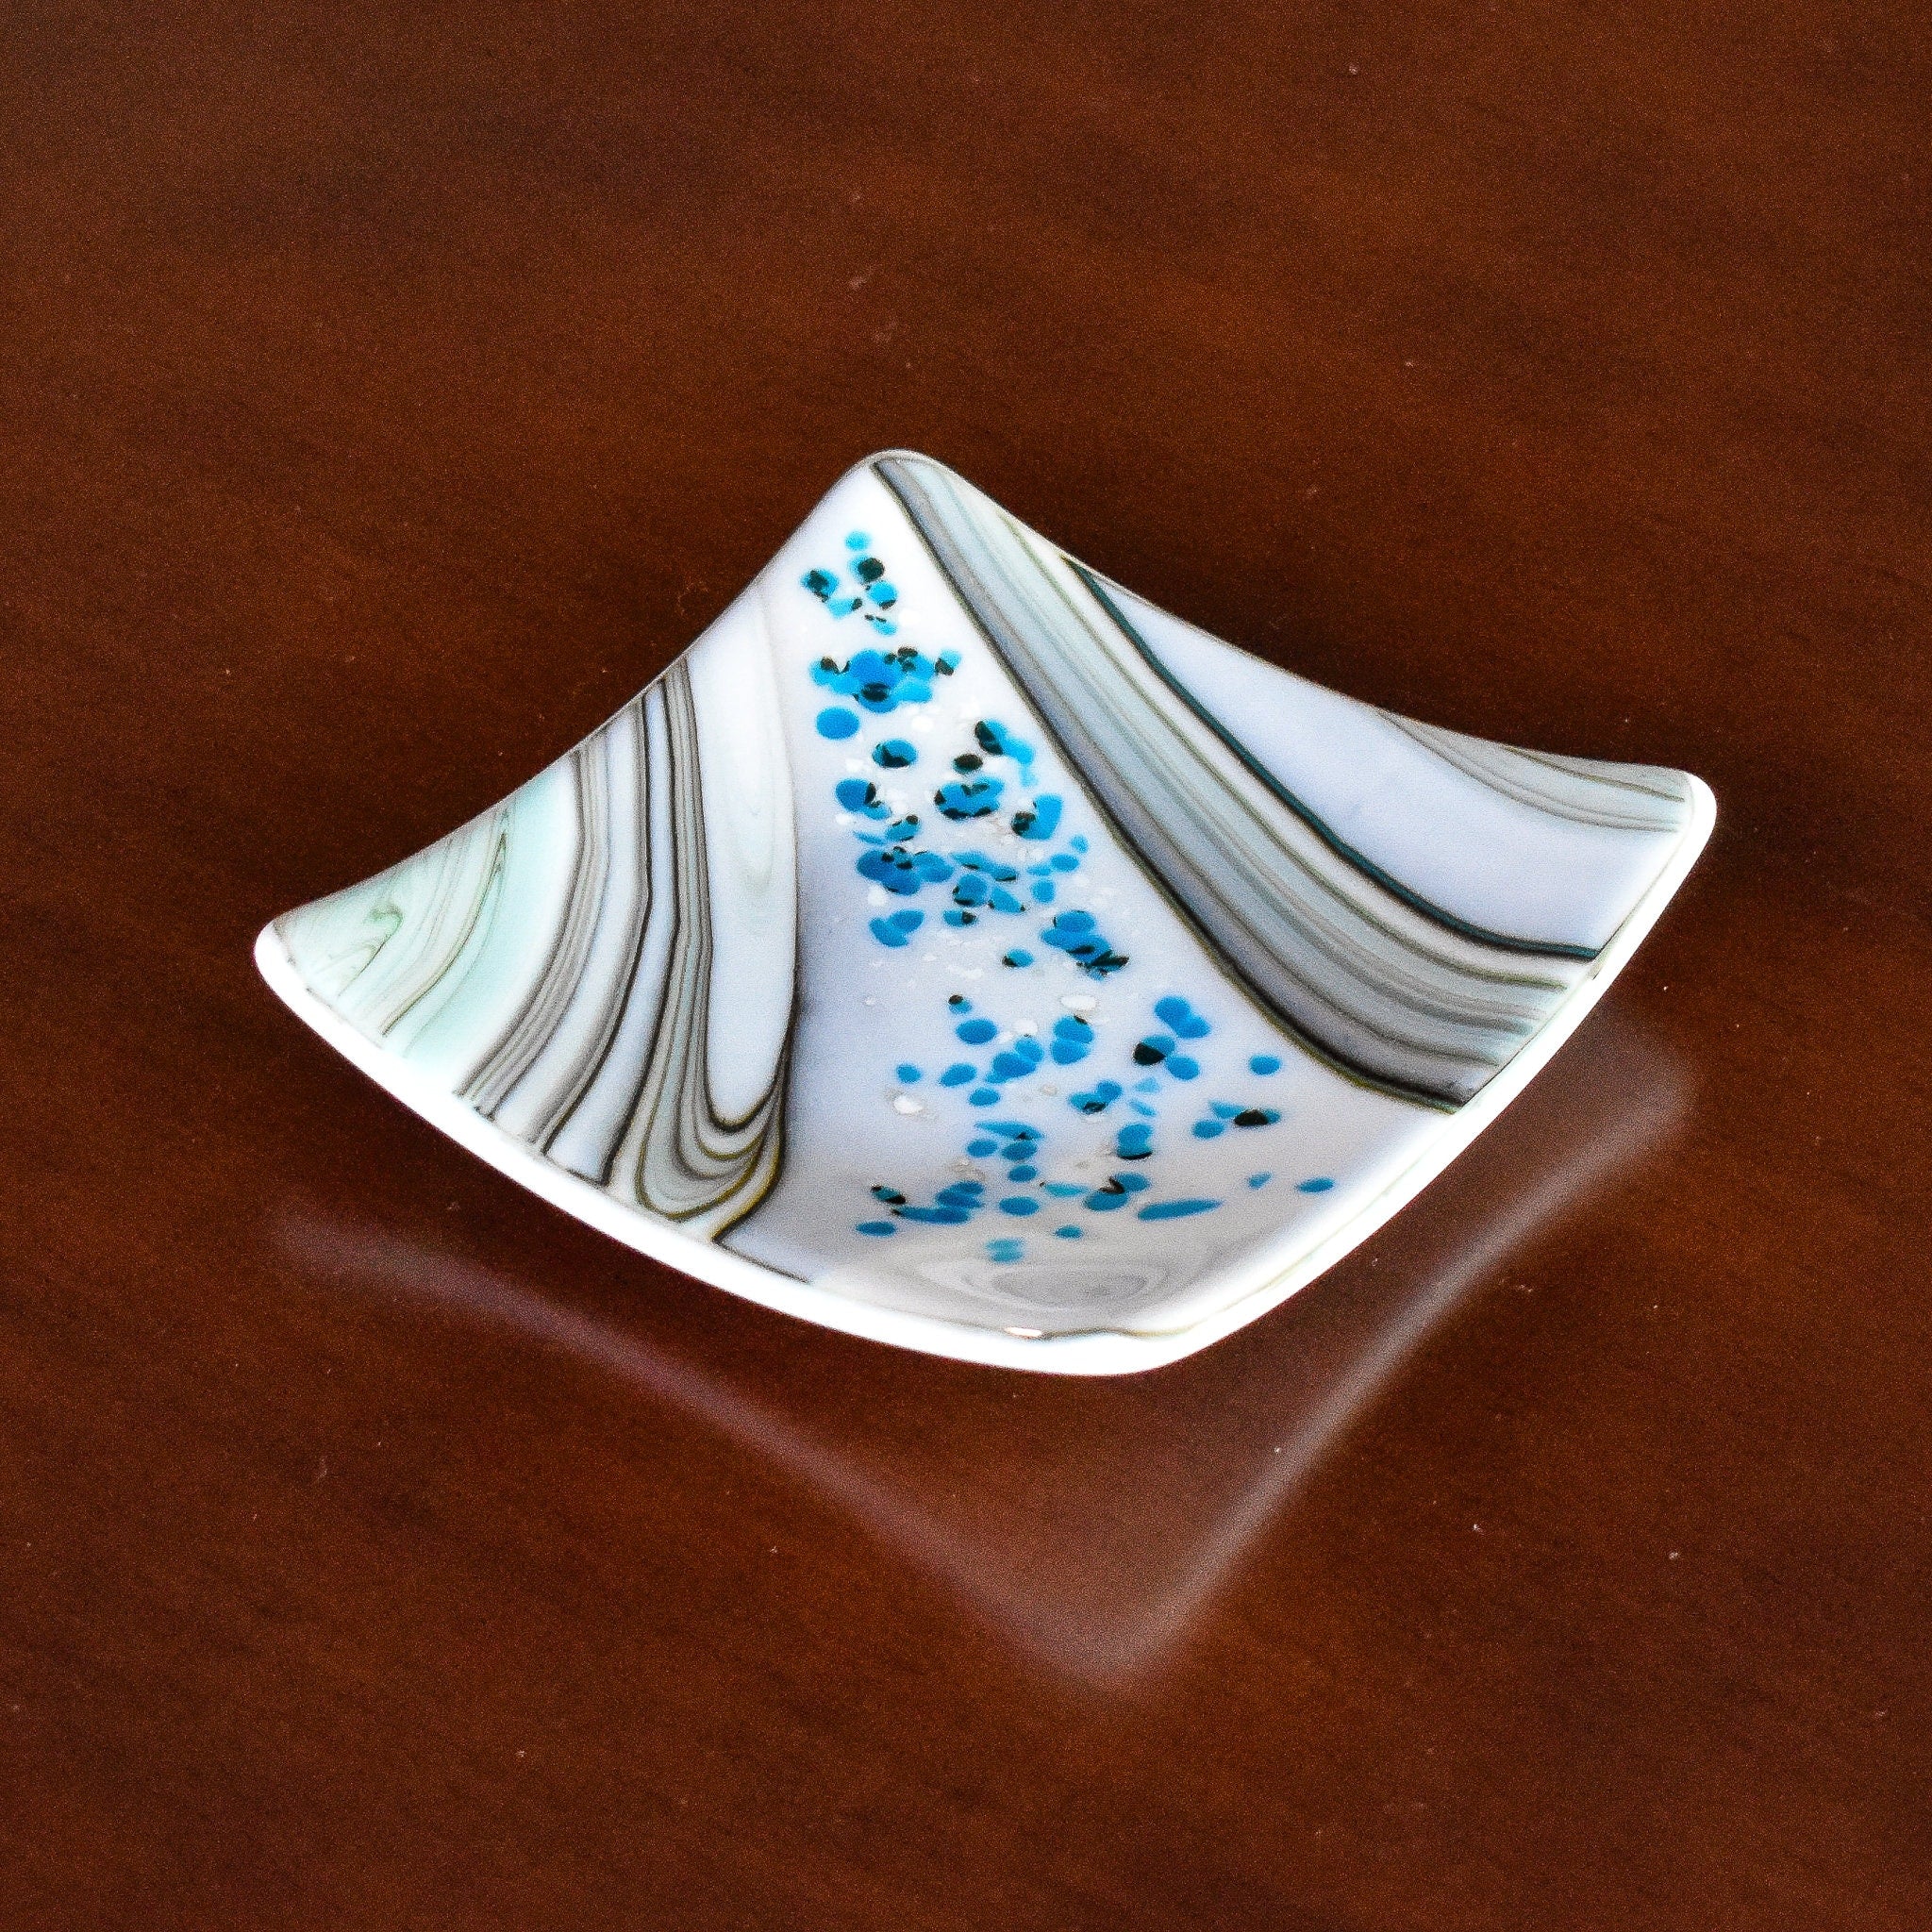 Small Contemporary Fused Glass Plate or Tray can be Displayed as Art or used as a Catchall Tray or Food Serving Dish